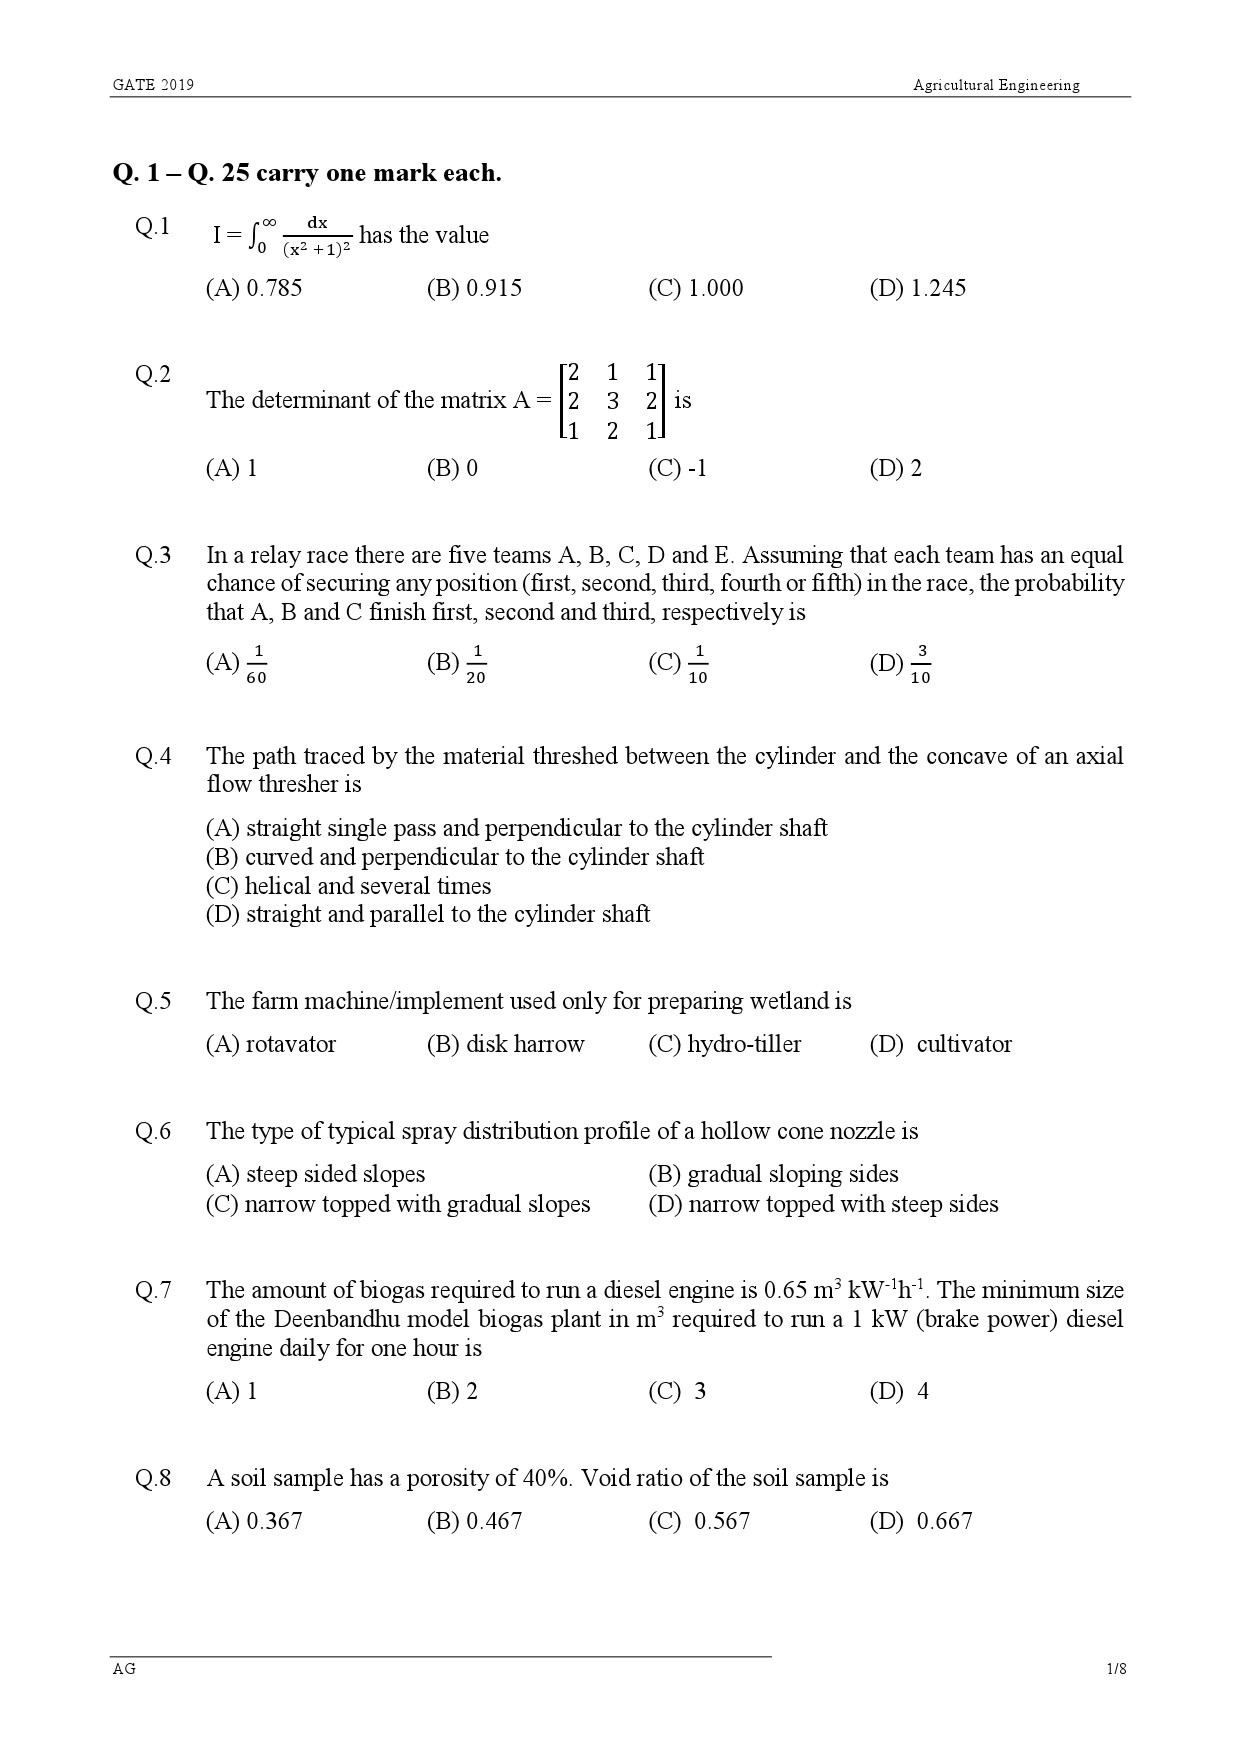 GATE Exam Question Paper 2019 Agricultural Engineering 1